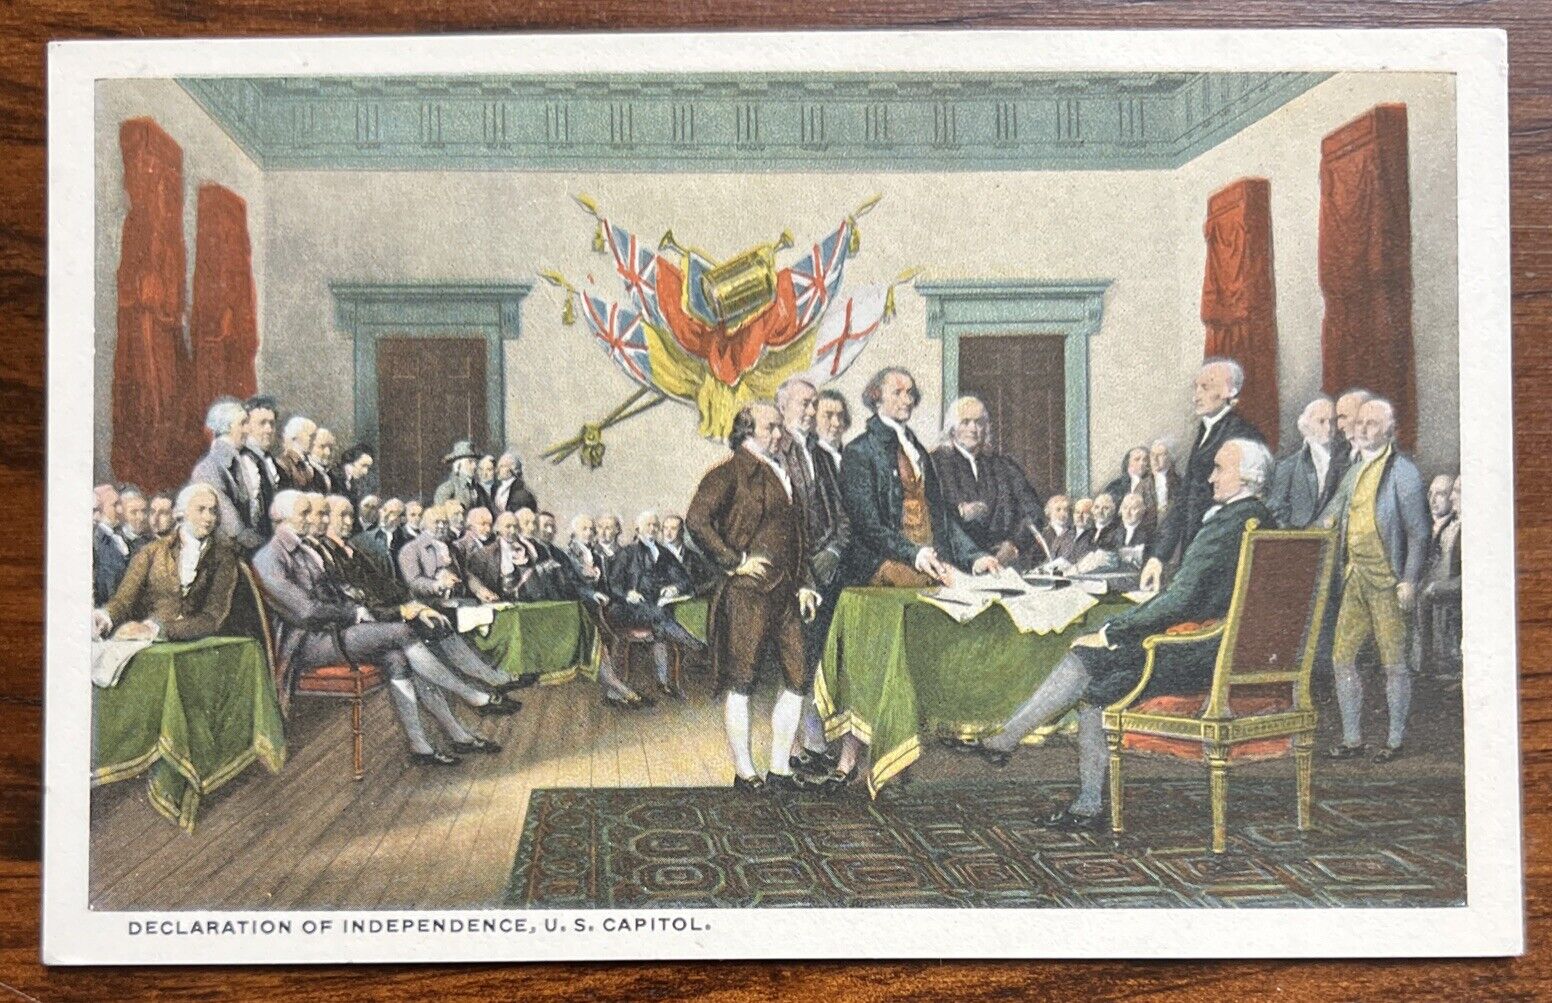 Declaration of Independence, U.S. Capitol Painting by Trumbull Antique Postcard